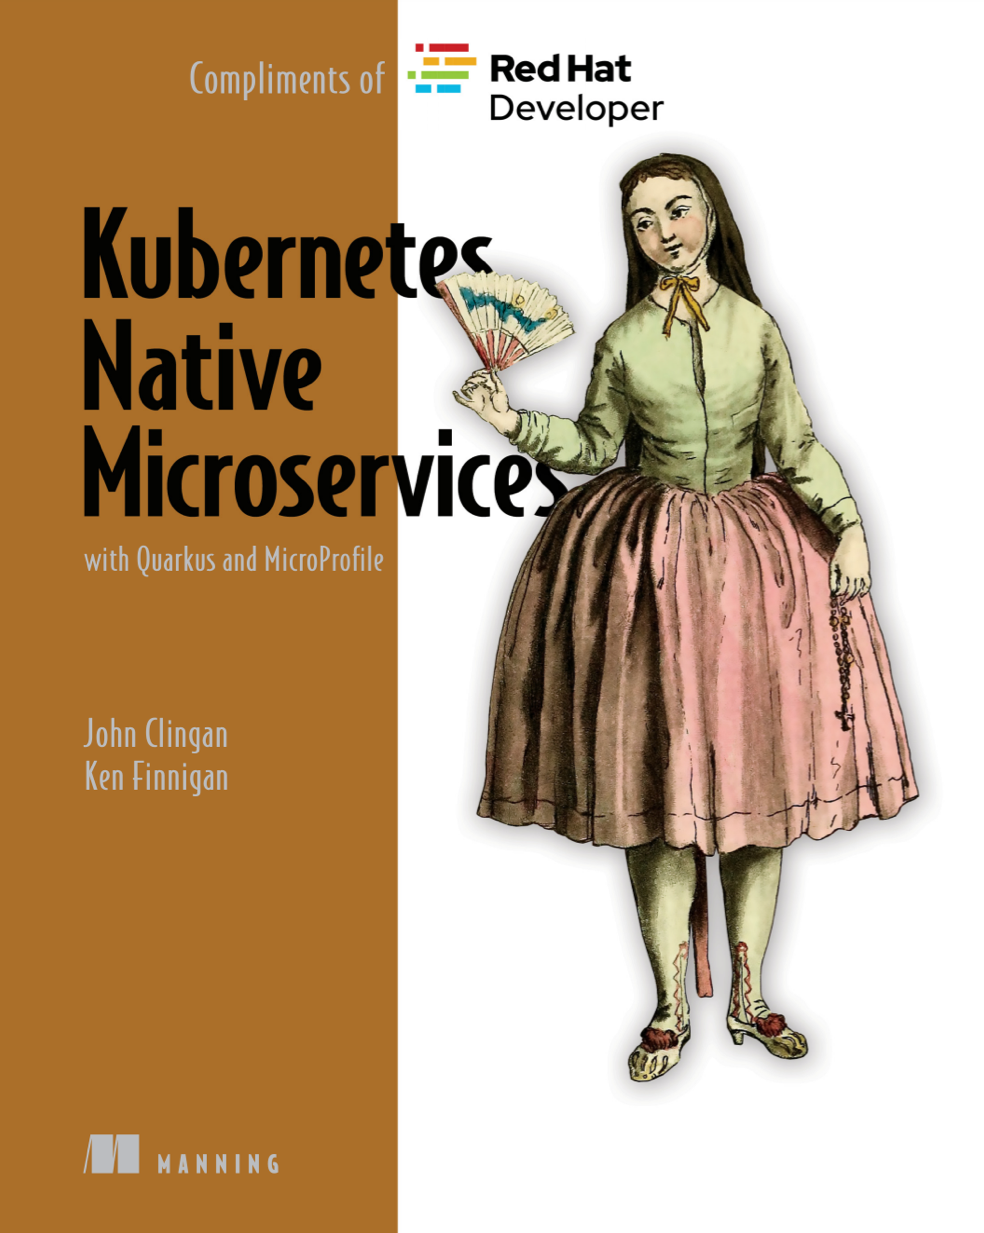 Kubernetes_Native_Microservices-RedHat_Final v4 cover